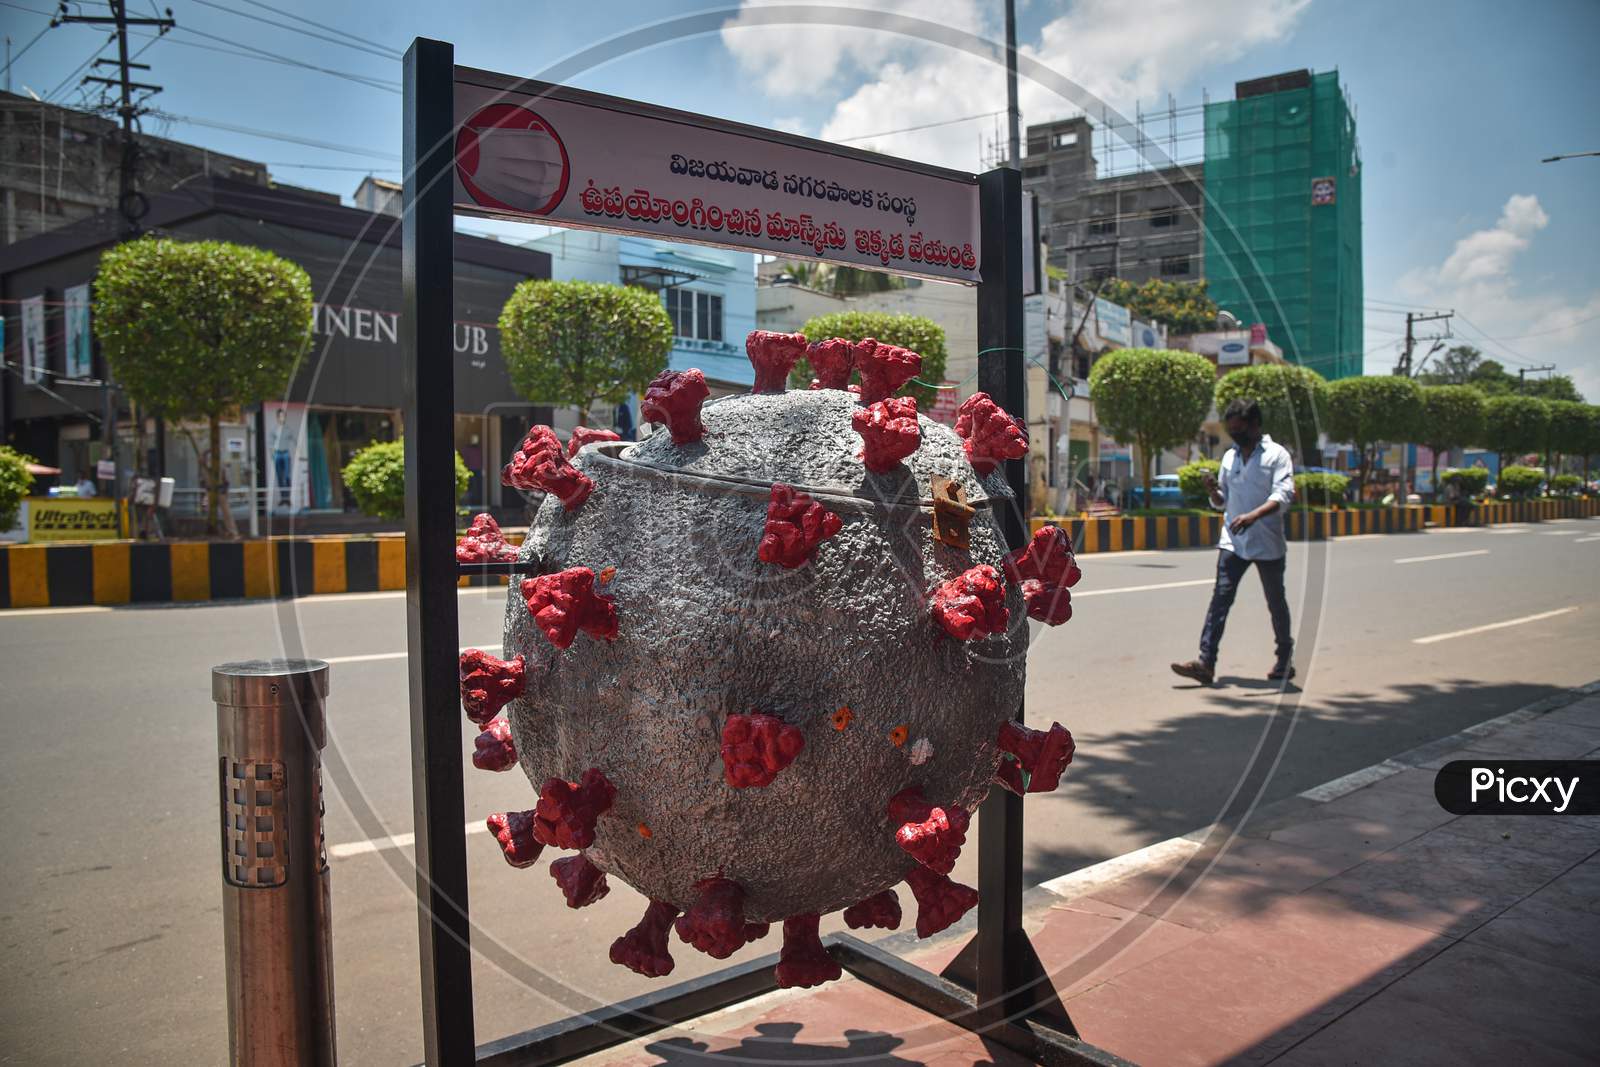 A Disposal Bin Representing Novel Coronavirus Is Placed On A Road By The Municipal Corporation To Create Awareness On Covid-19 Waste Disposals, At Mg Road, In Vijayawada.